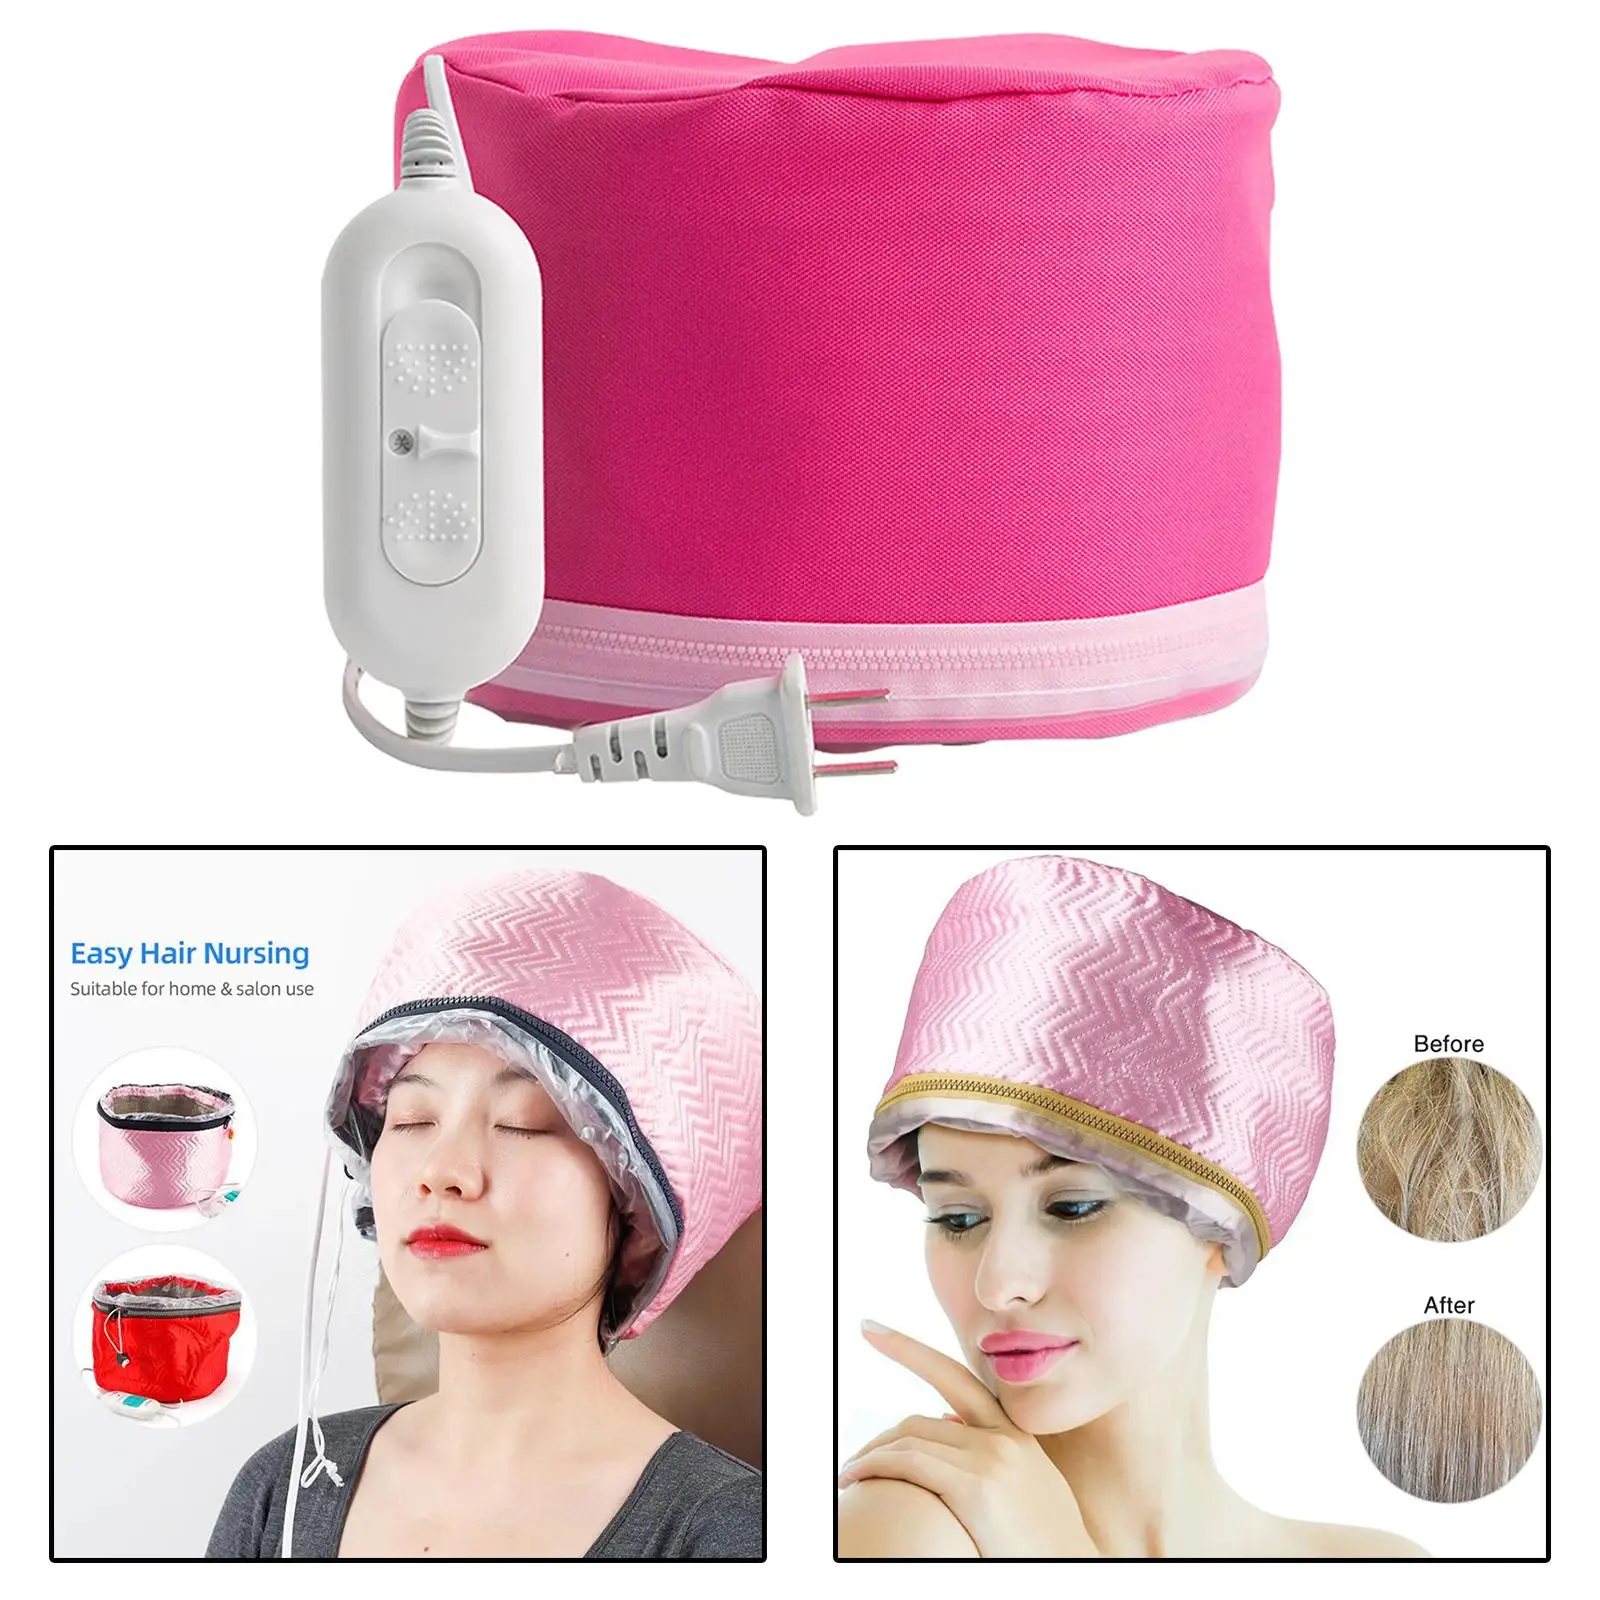 Hair Heating Caps Steamer ,3 ,Adjustable Dryers Microwave for Deep Conditioning Travel Hot Nourishing